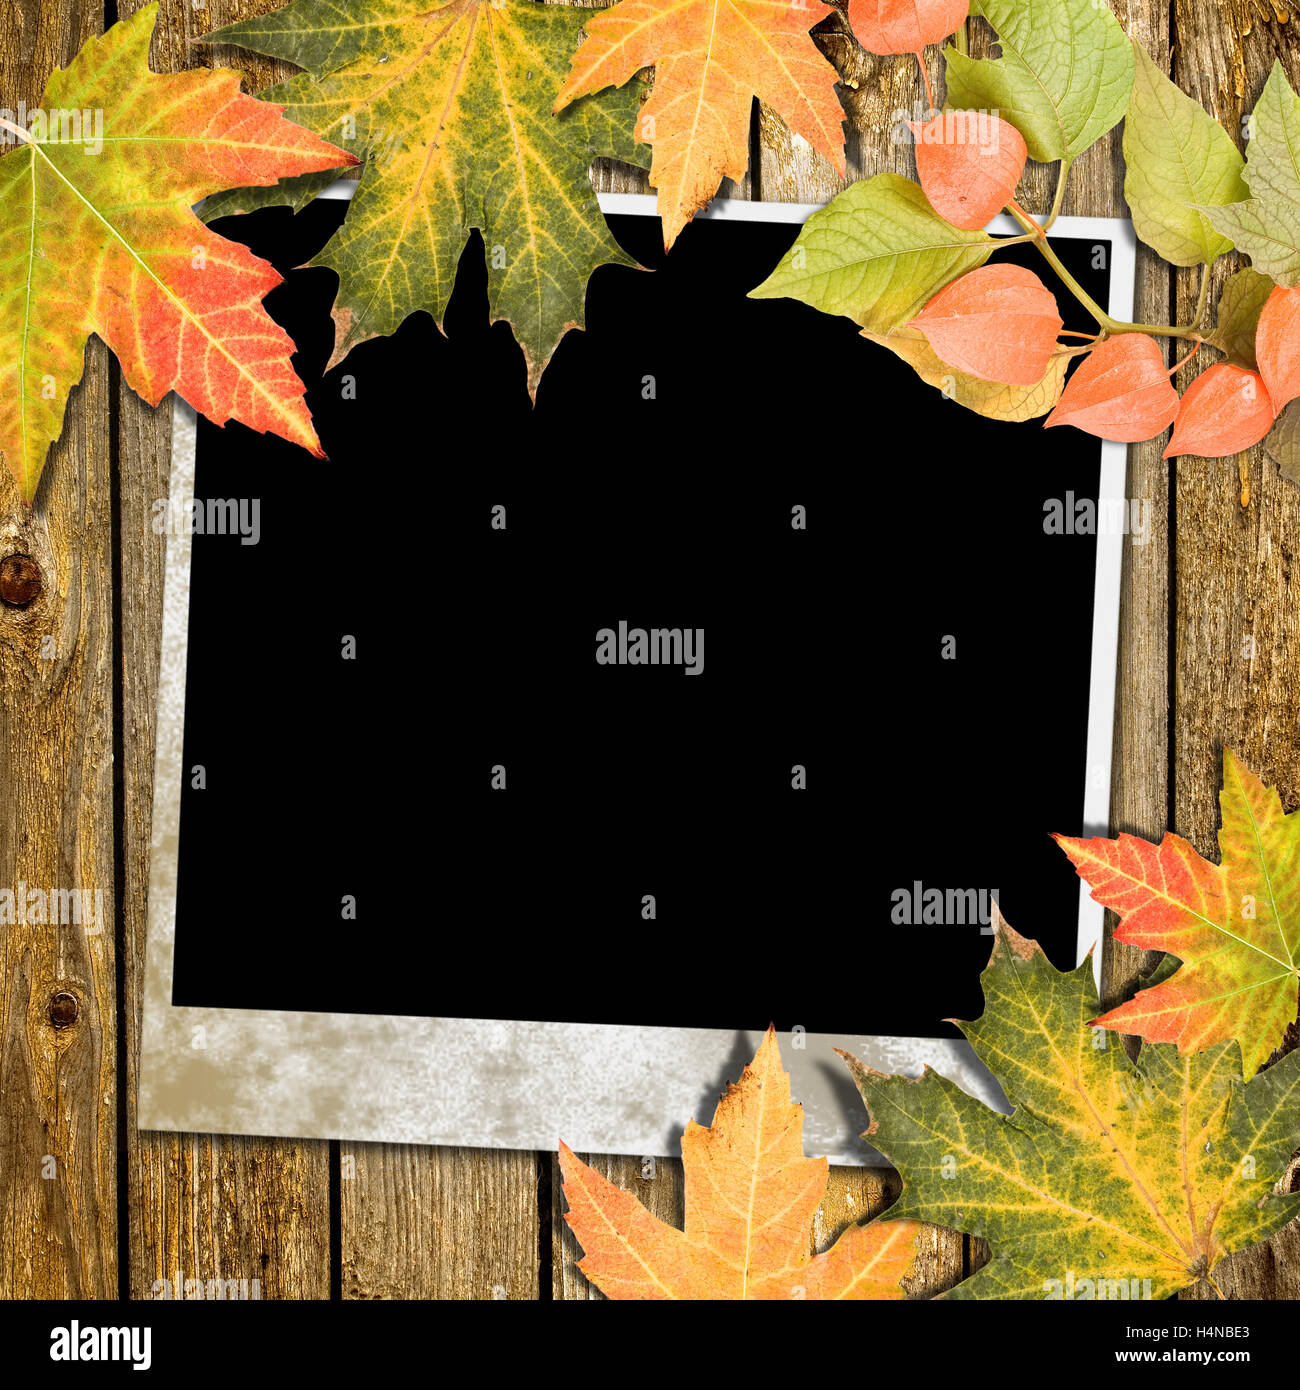 Autumn Leaves and photo frame over wooden background Stock Photo